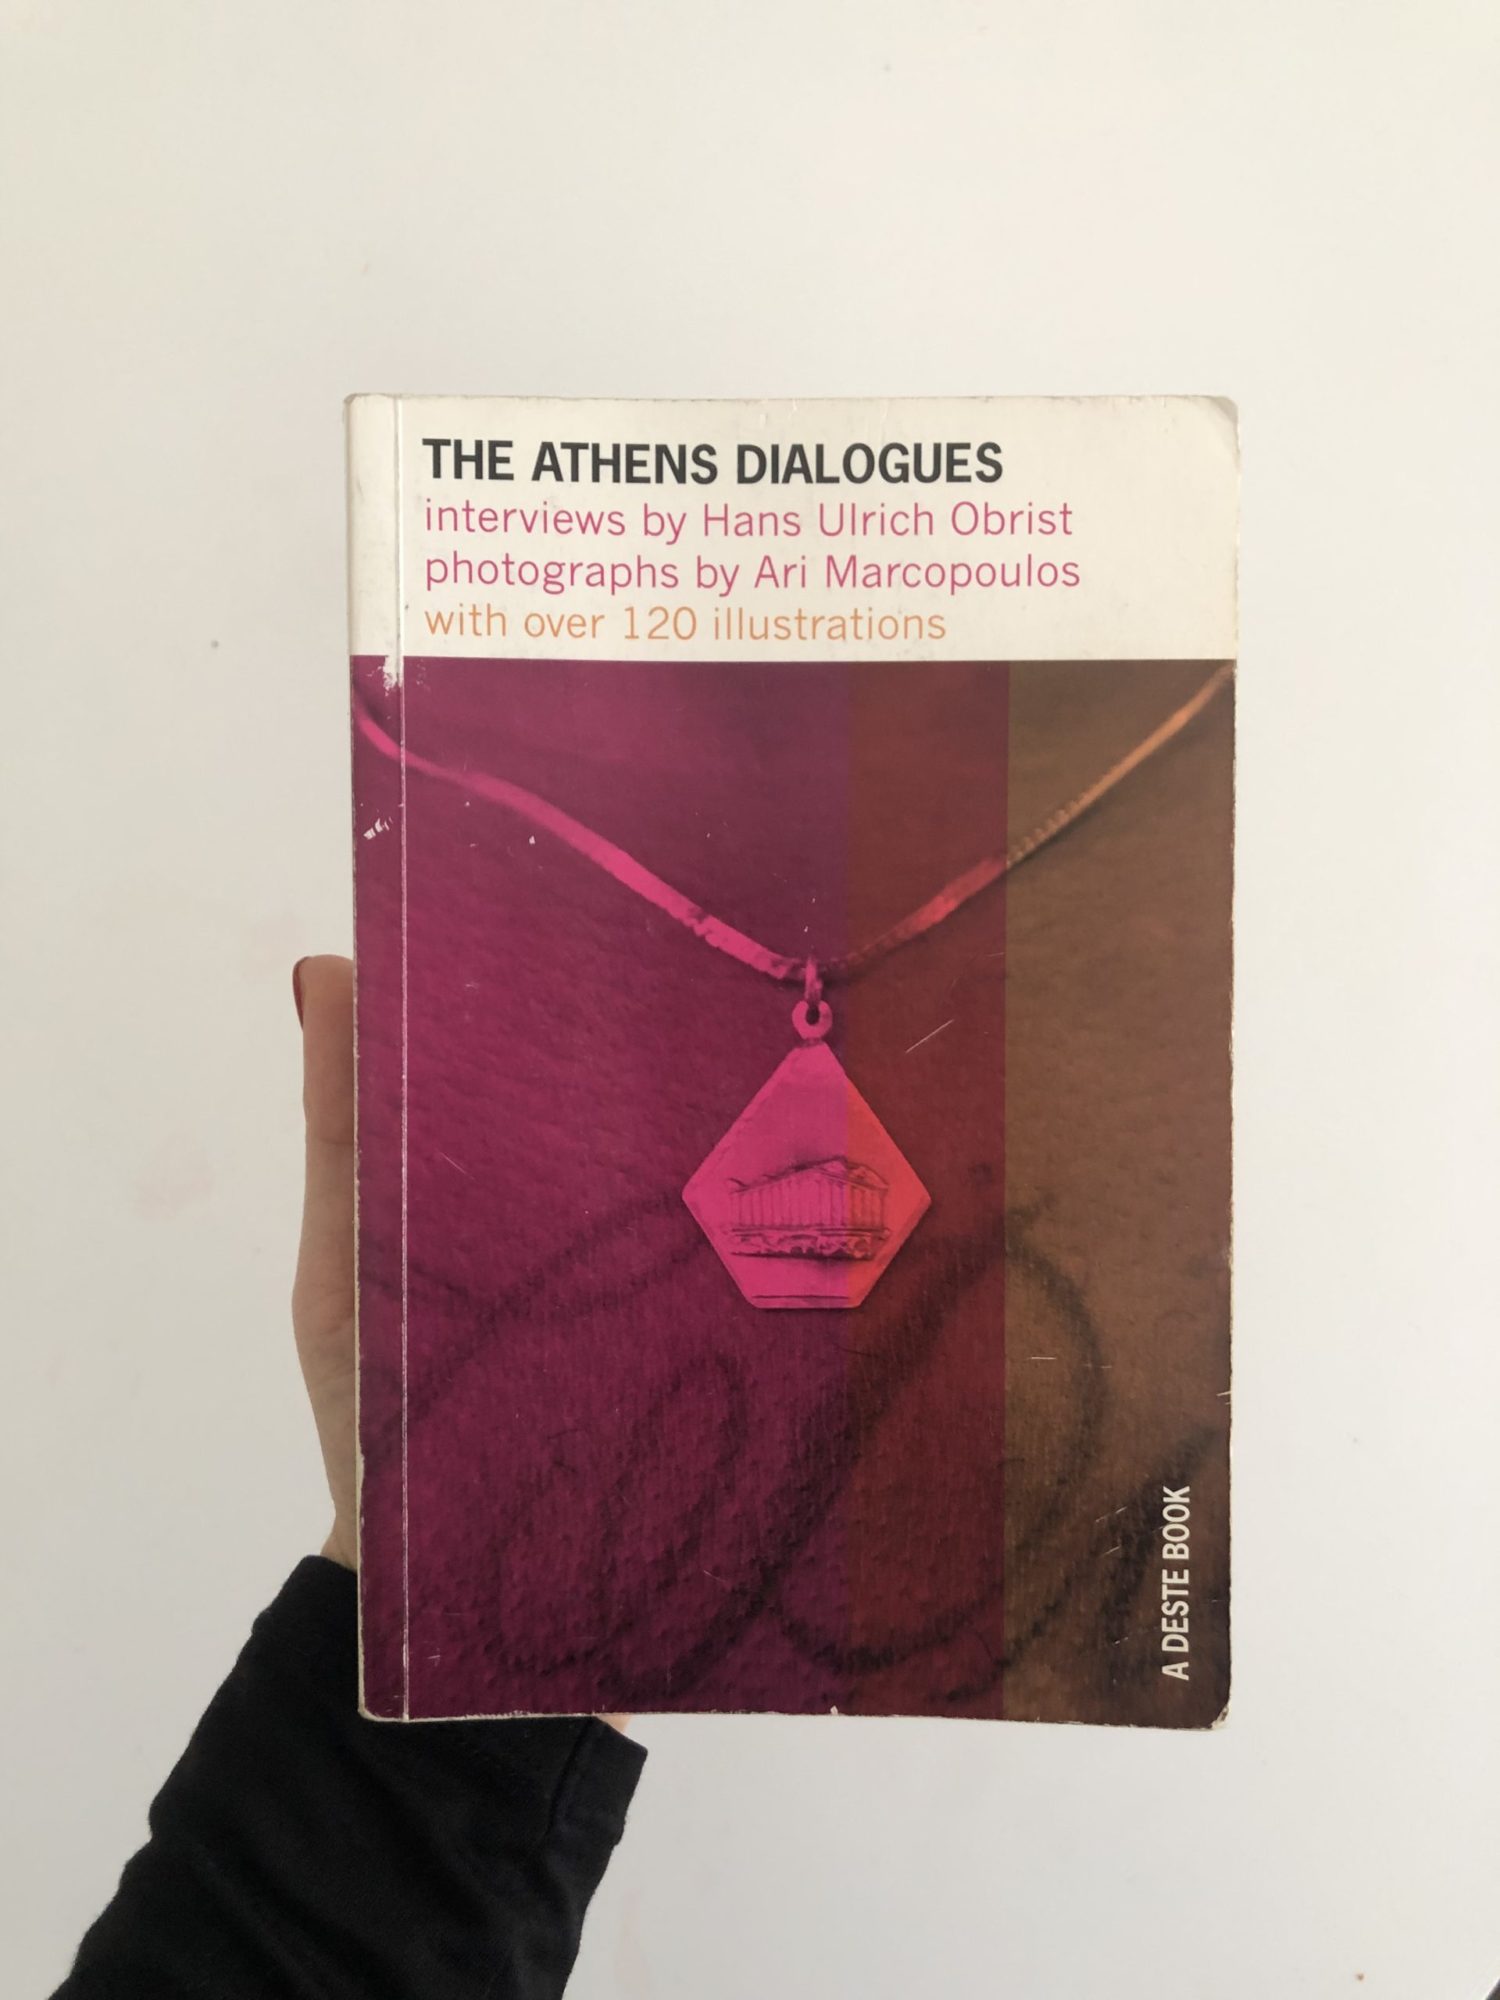 A photo of the front cover of The Athens Dialogues: Interviews by Hans Ulrich Obrist. The cover is pink and orange, and features the title and author at the top.